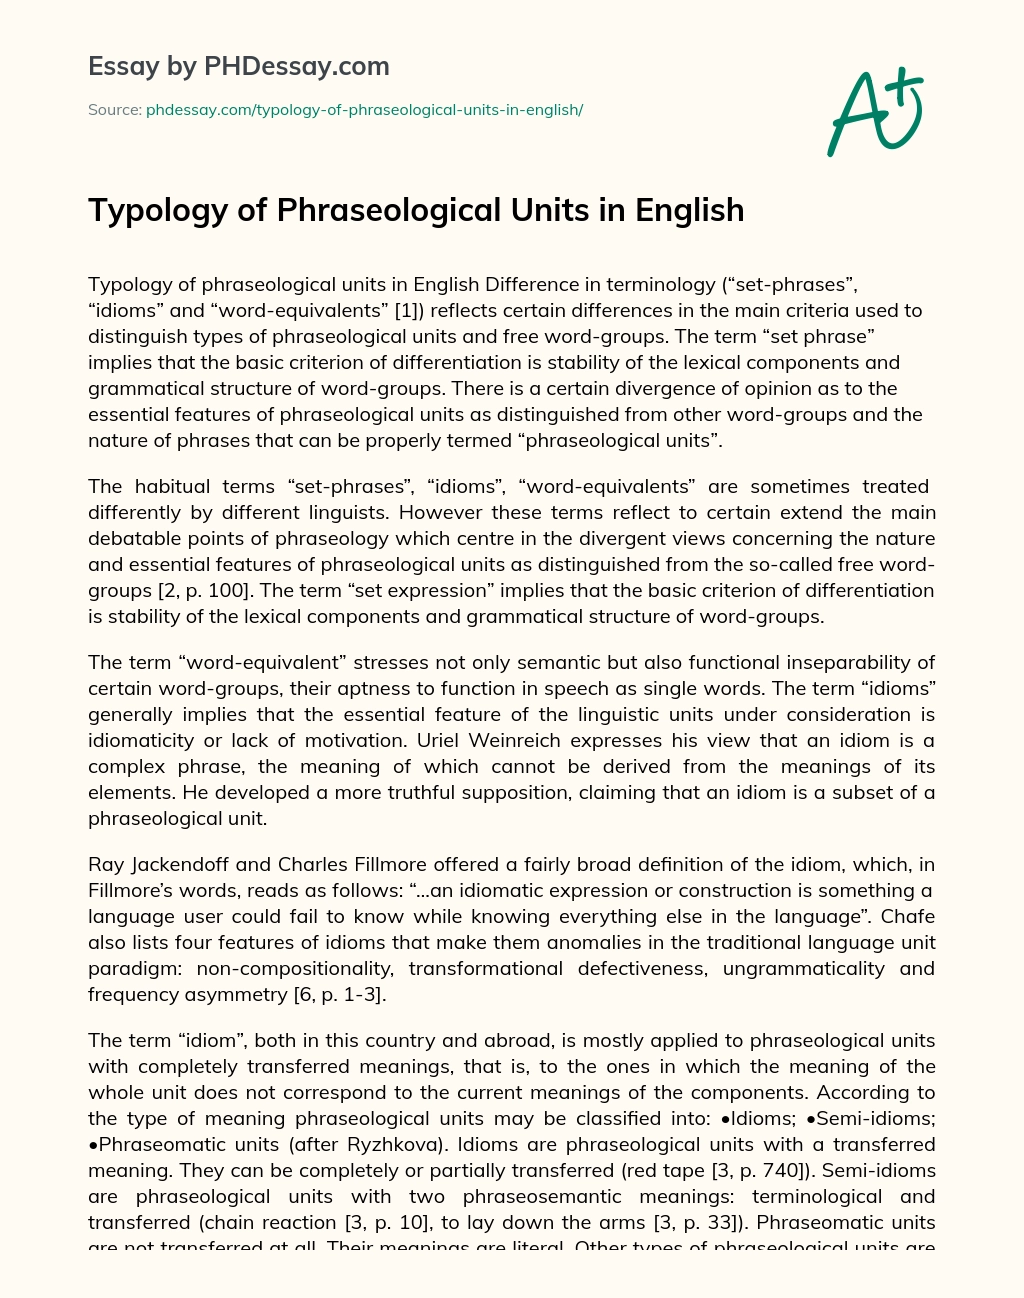 Typology of Phraseological Units in English essay